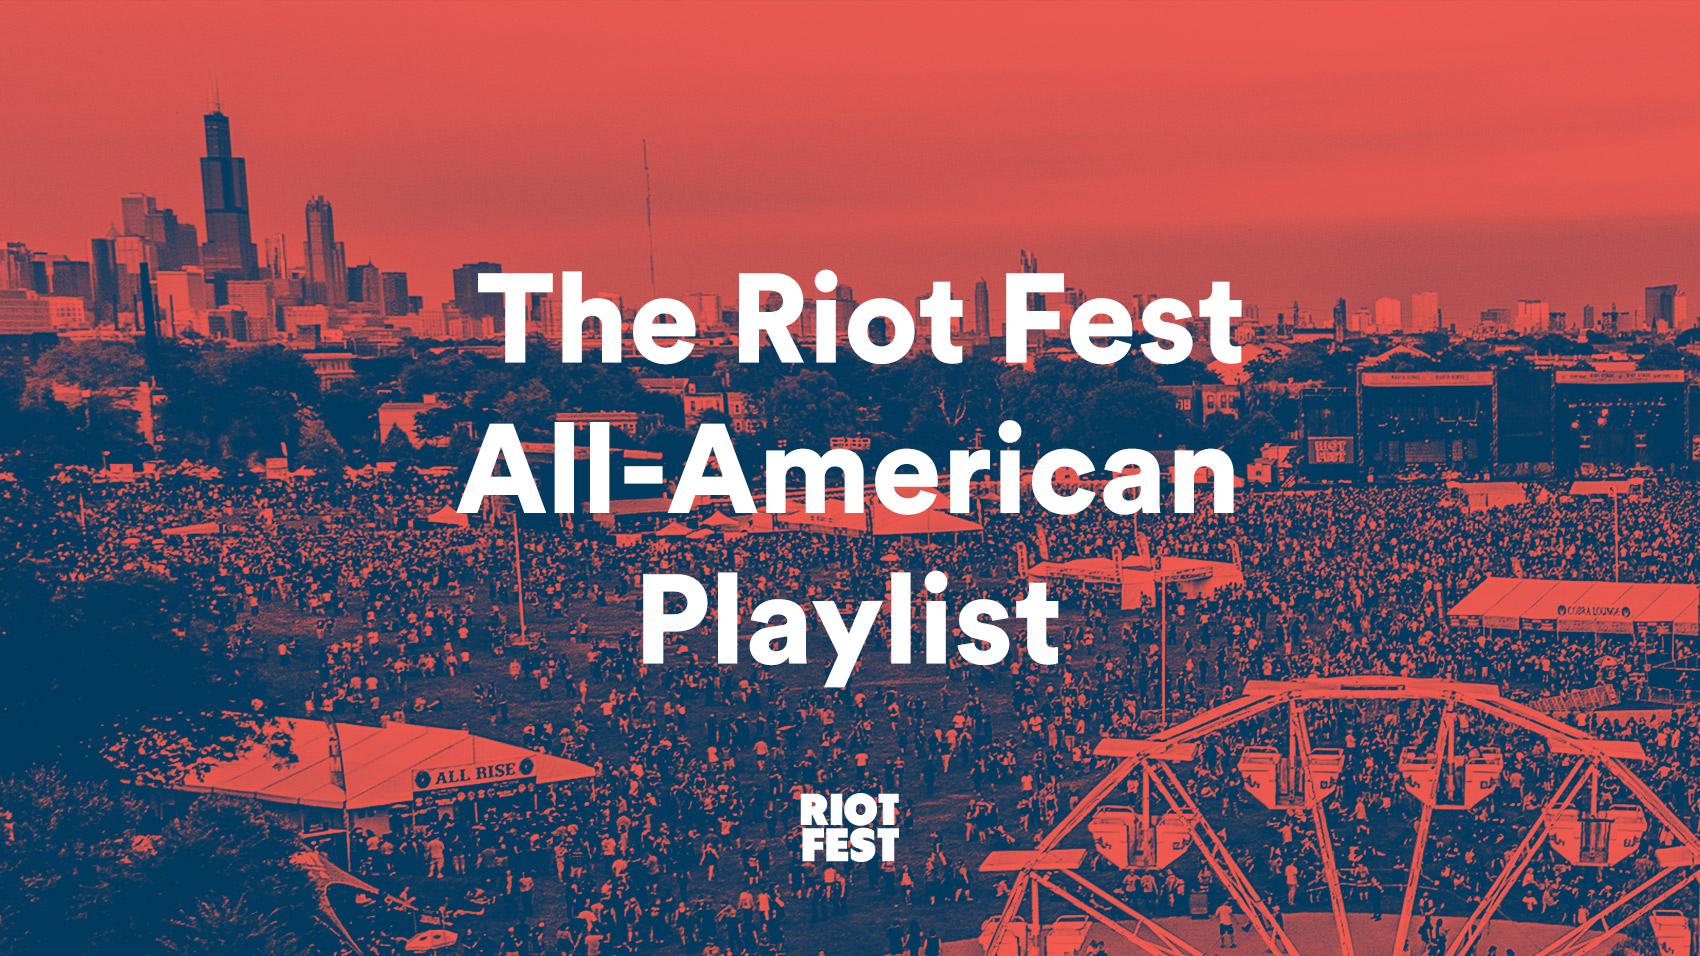 Honor America with the Riot Fest AllAmerican Playlist Riot Fest